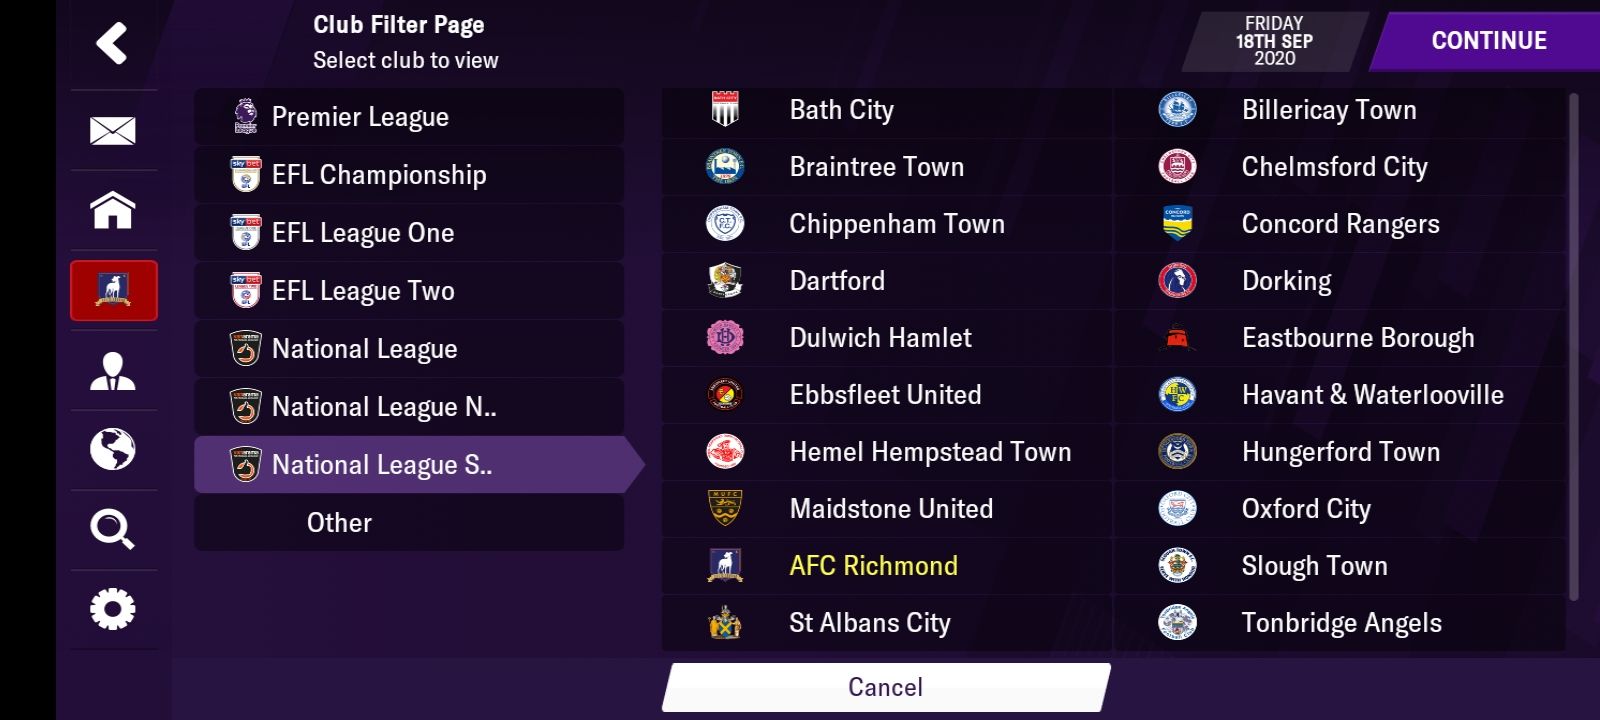 AFC Richmond (From Ted Lasso Series) - Football Manager 2021 Mobile - FMM  Vibe